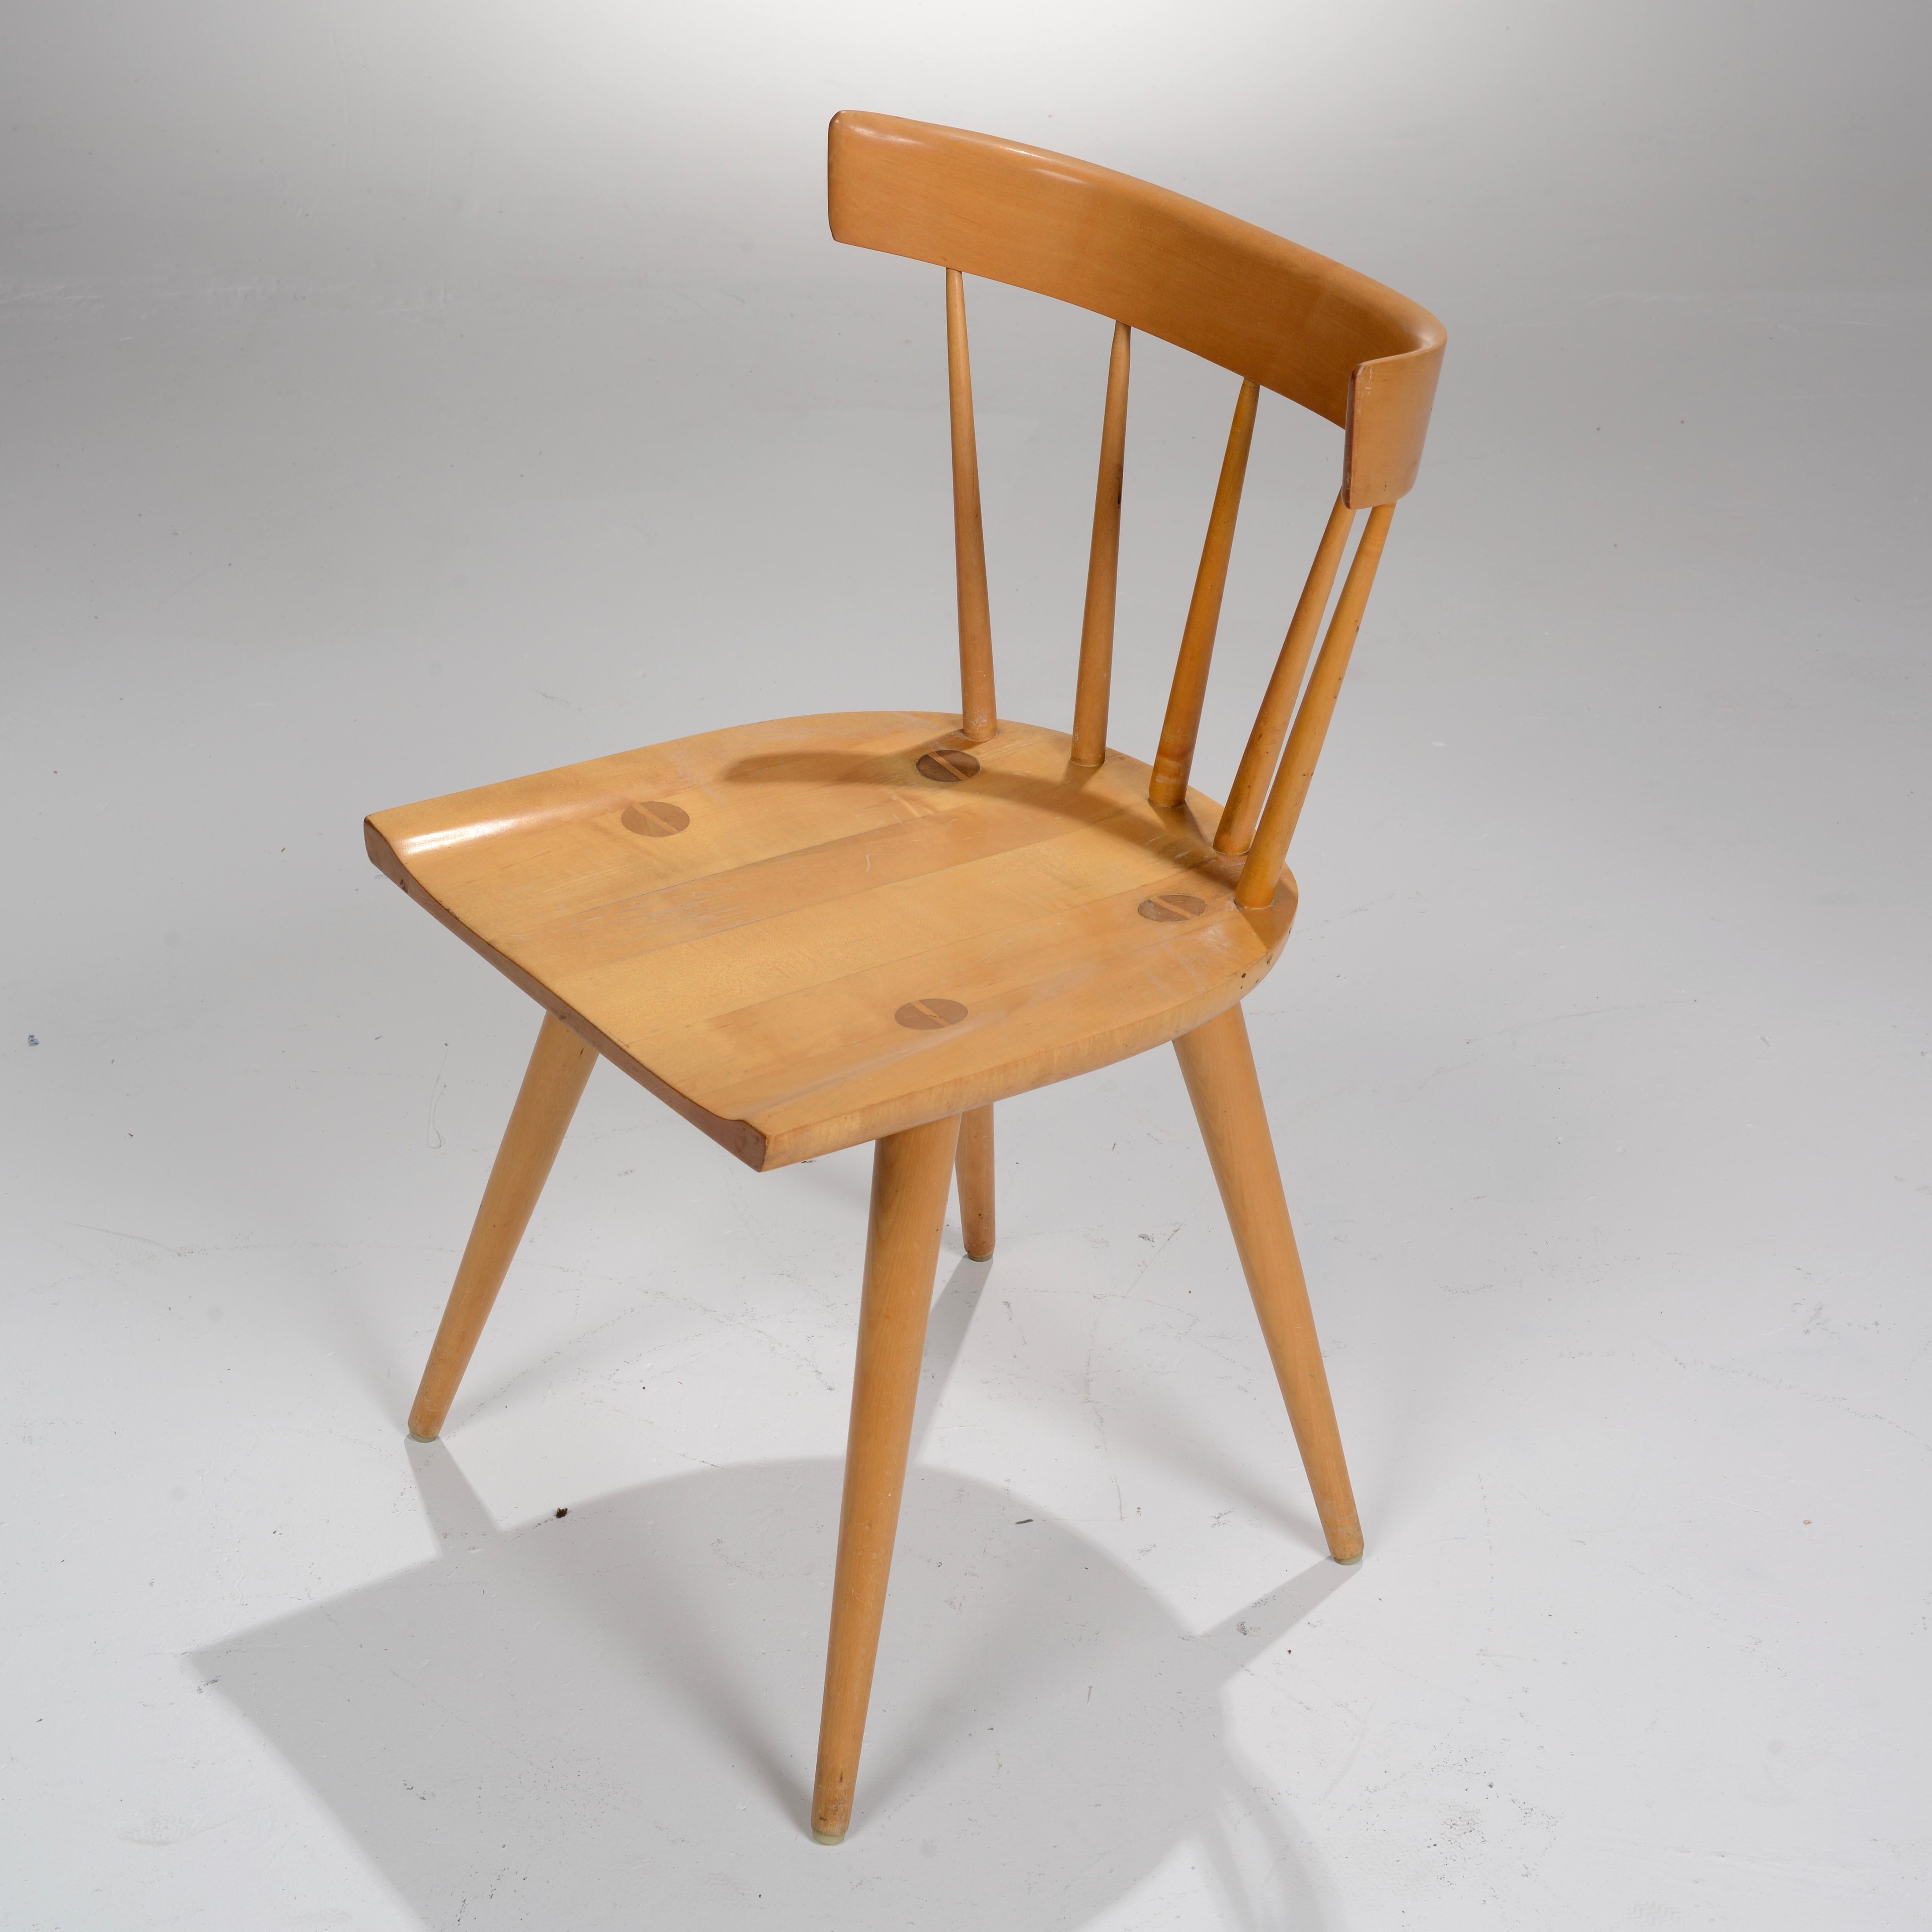 Maple spindle back dining chair from the Planner Group series designed by Paul McCobb and manufactured by Winchendon, Massachusetts. The seat rests atop four tapered legs and is inlaid with four oversize wooden screw motifs.
We currently have 10 in